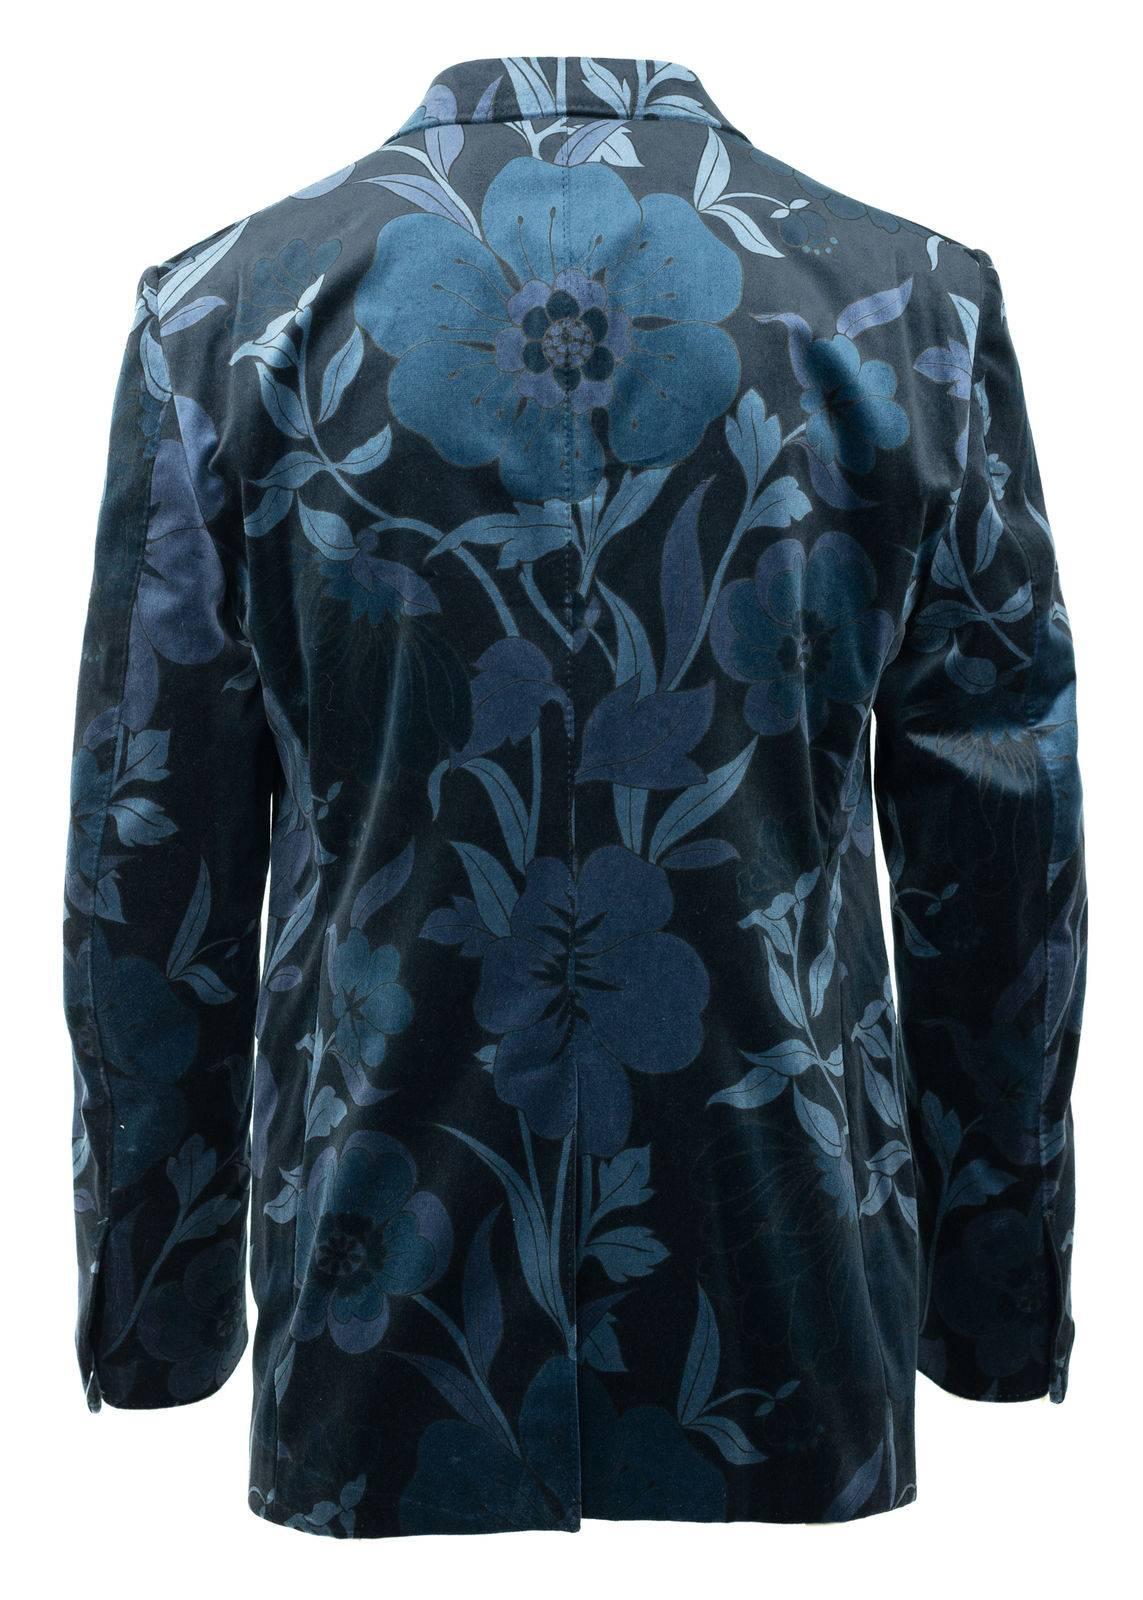 Showcase your sublime appreciation for nature in your Tom Ford Velvet Jacket. This cool blue Shelton features a surreal floral design, silk blended interior, and concealed sleeve hem closure. You can pair this suave unit with and all white ensemble